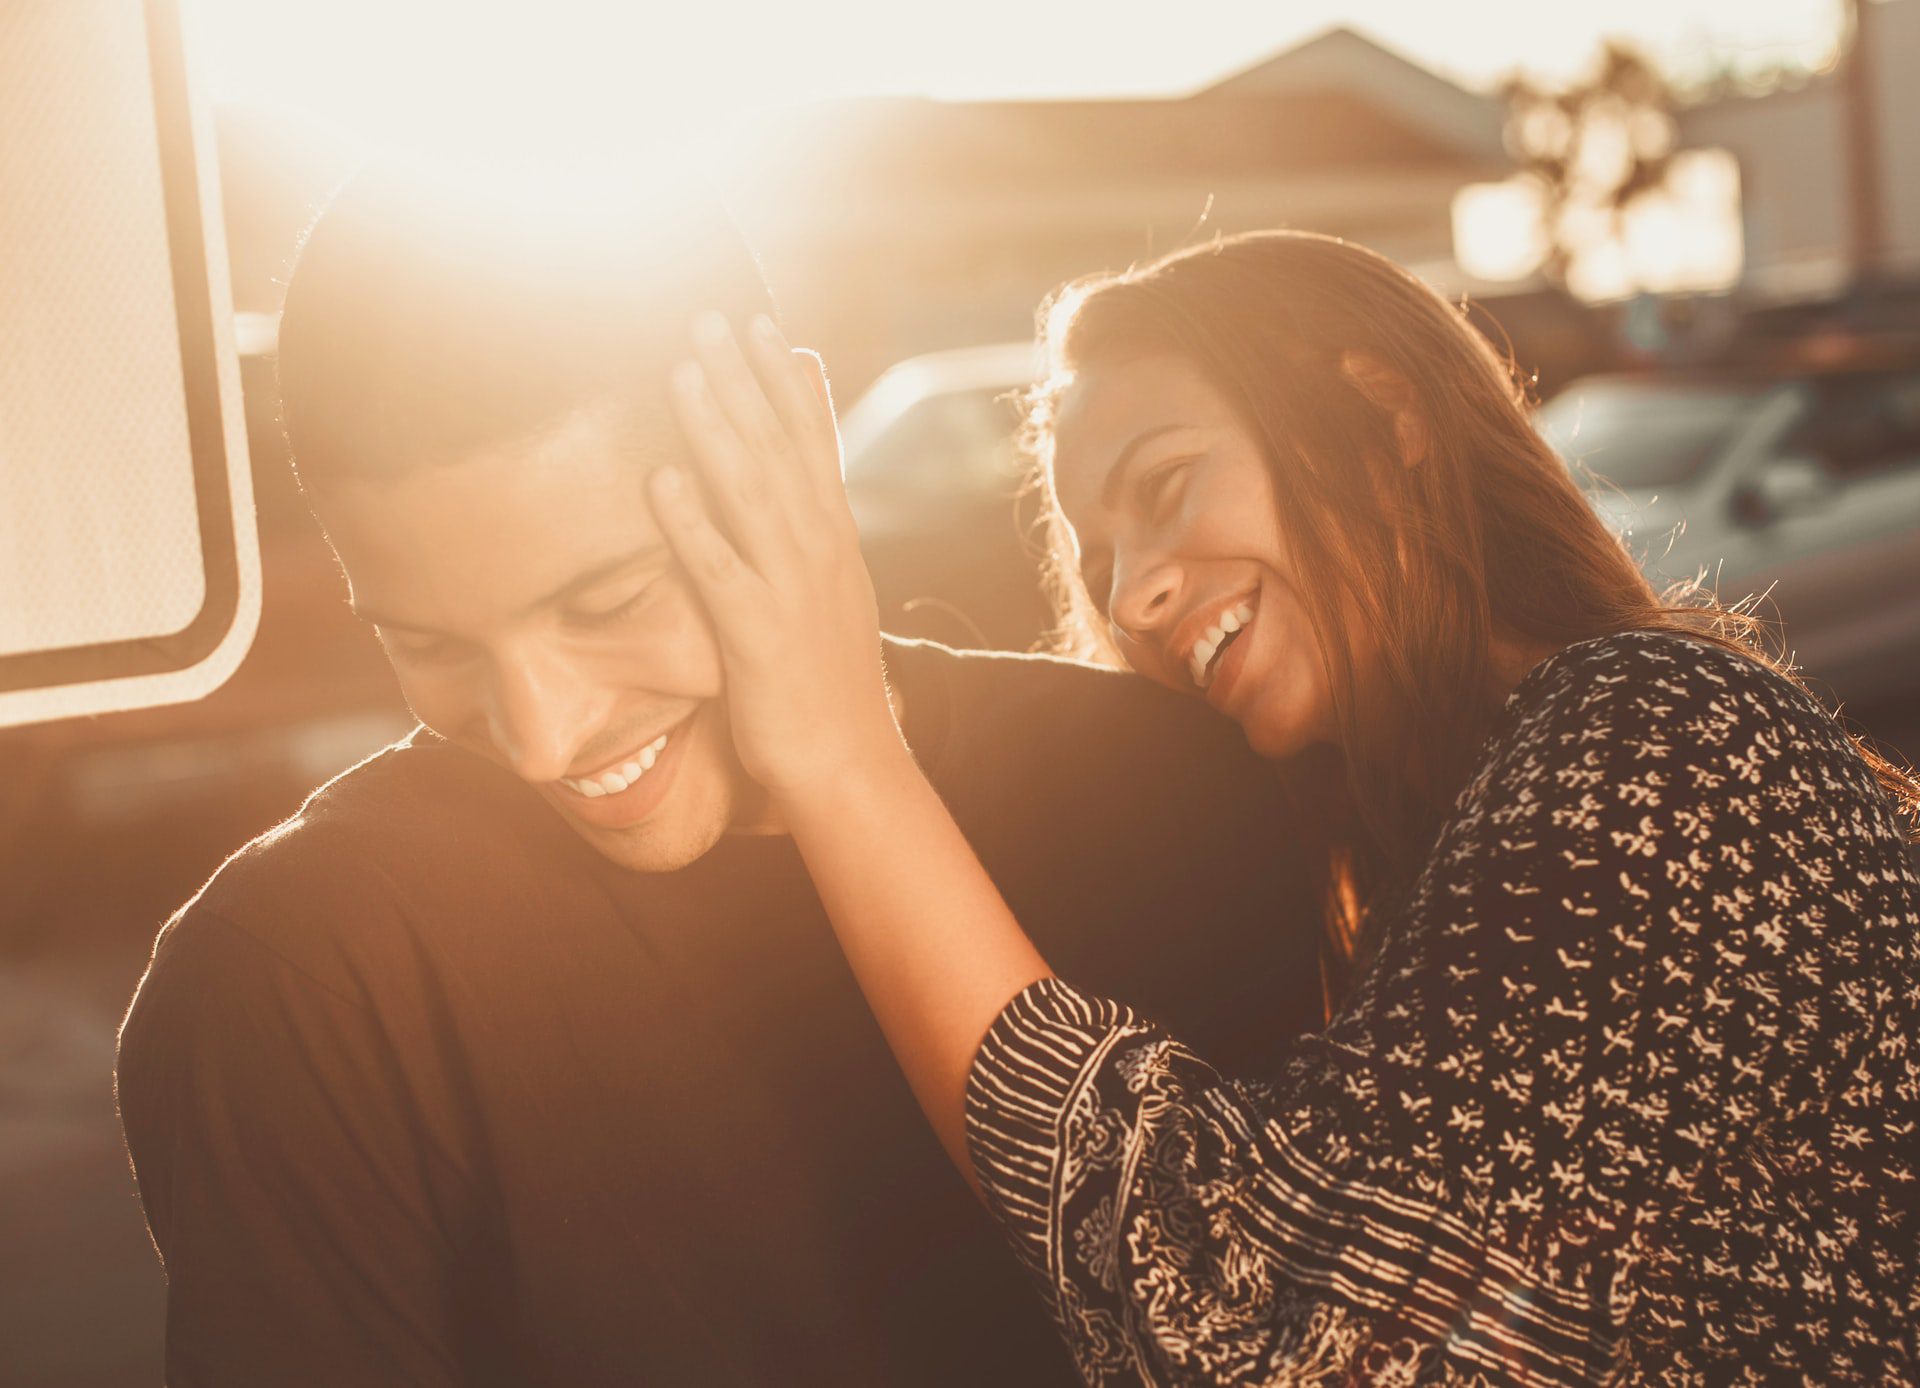 Attachment Styles and How They Impact Our Romantic Relationships